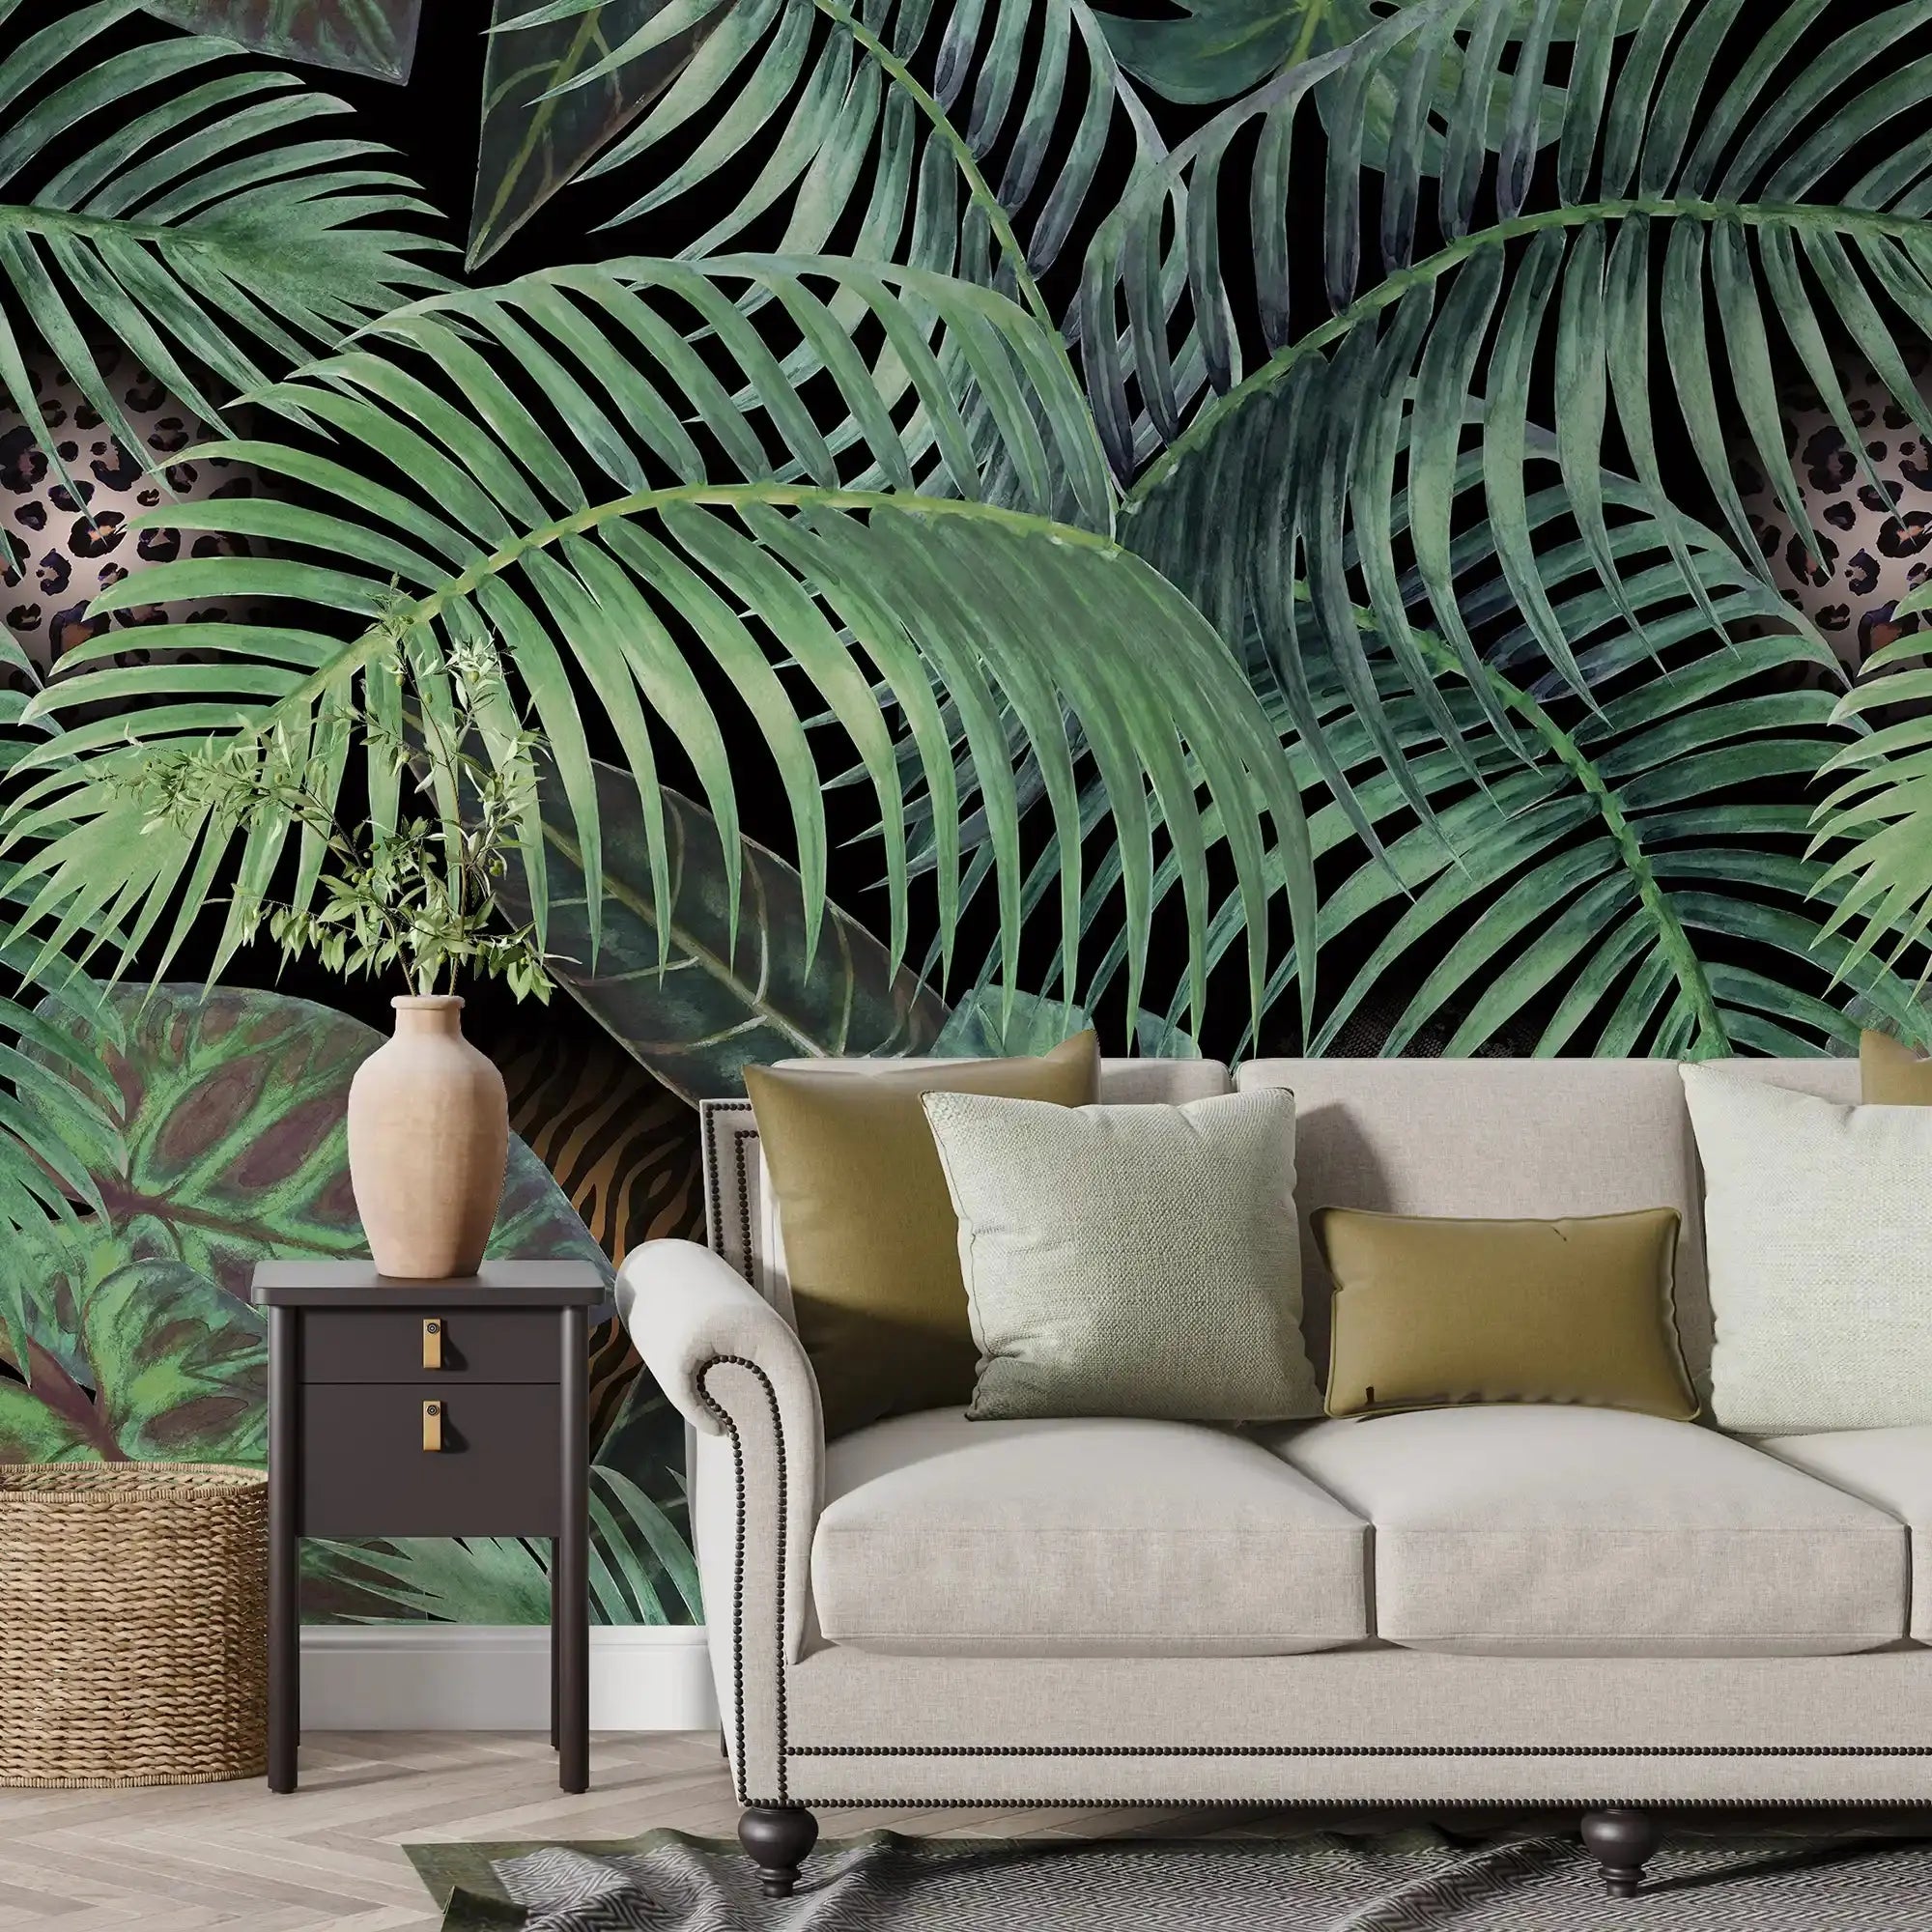 3096-C / Jungle Leaves Wallpaper - Tropical Botanical Wall Decor - Self Adhesive, Peel and Stick - Modern and Contemporary - Artevella